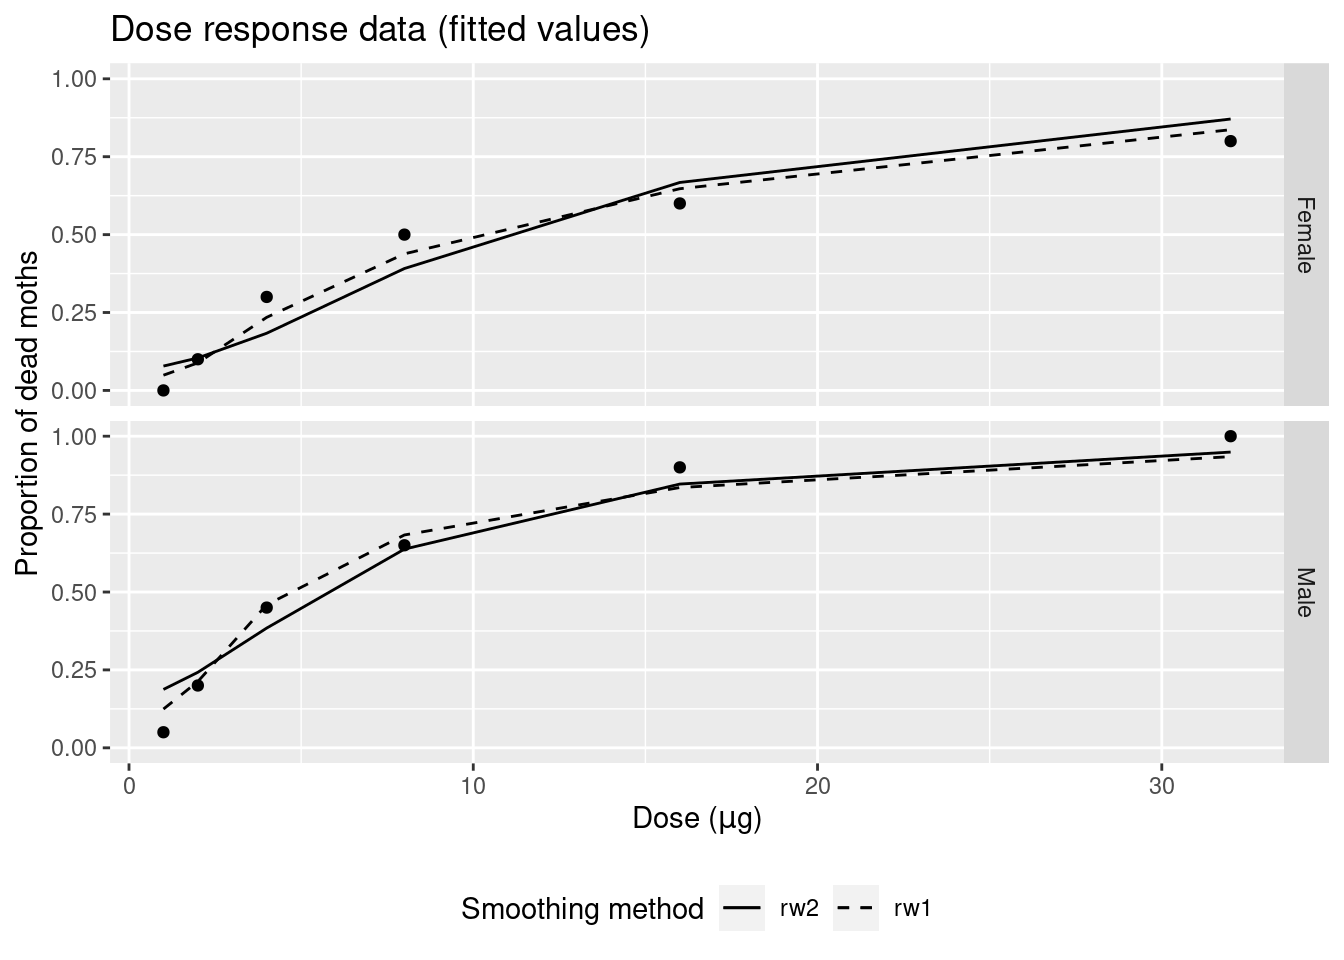 Posterior means of the random effects of the models fit to the dose-response dataset.